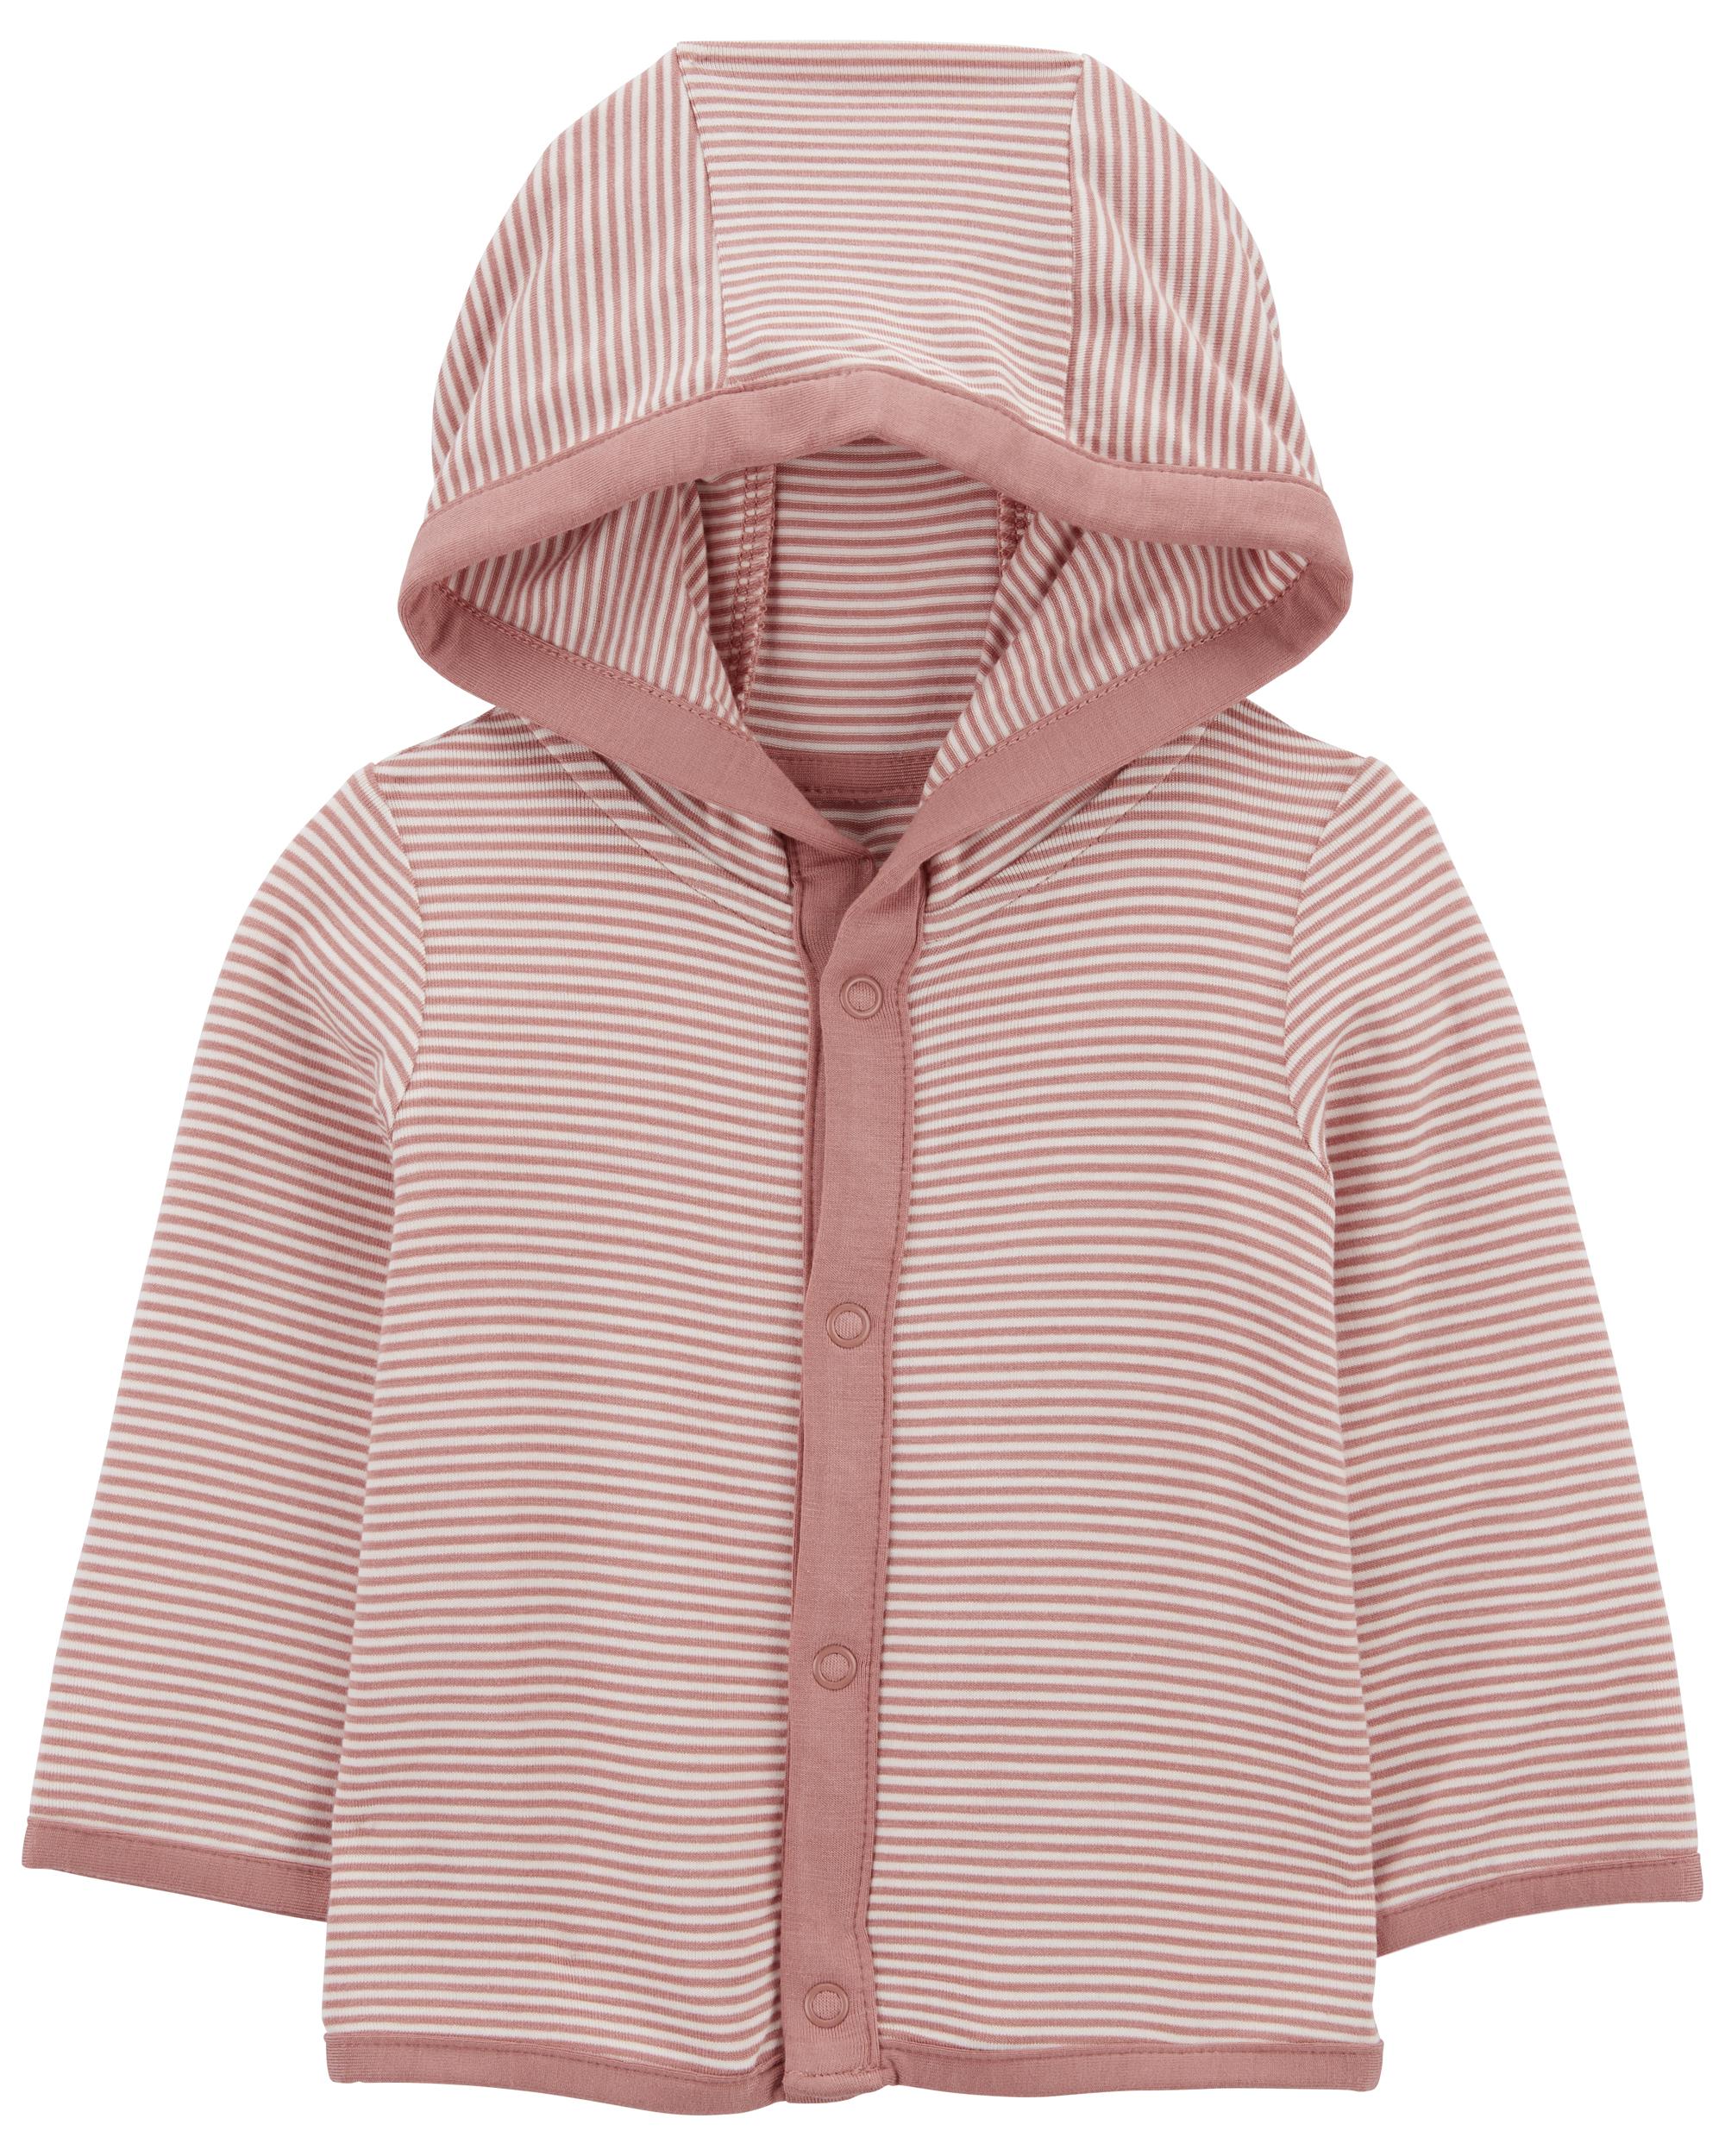 Baby Pink & White PurelySoft Jersey Hooded Cardigan